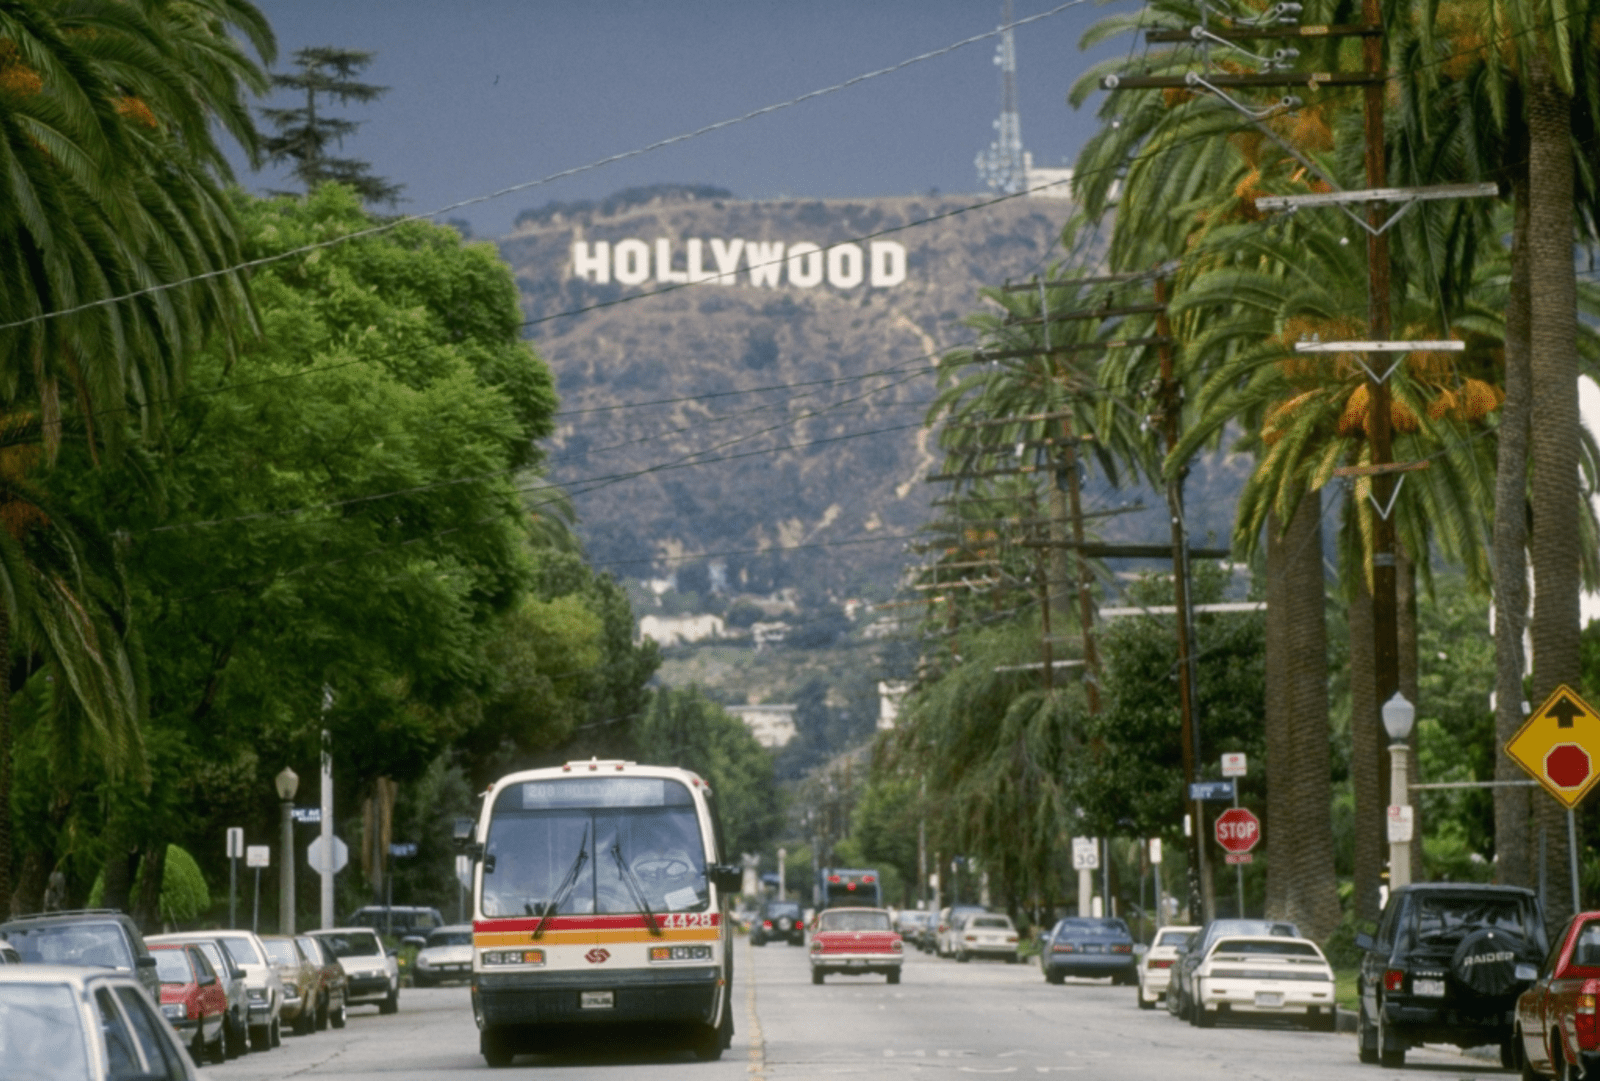 Street view of Hollywood with the iconic hill sign in the background